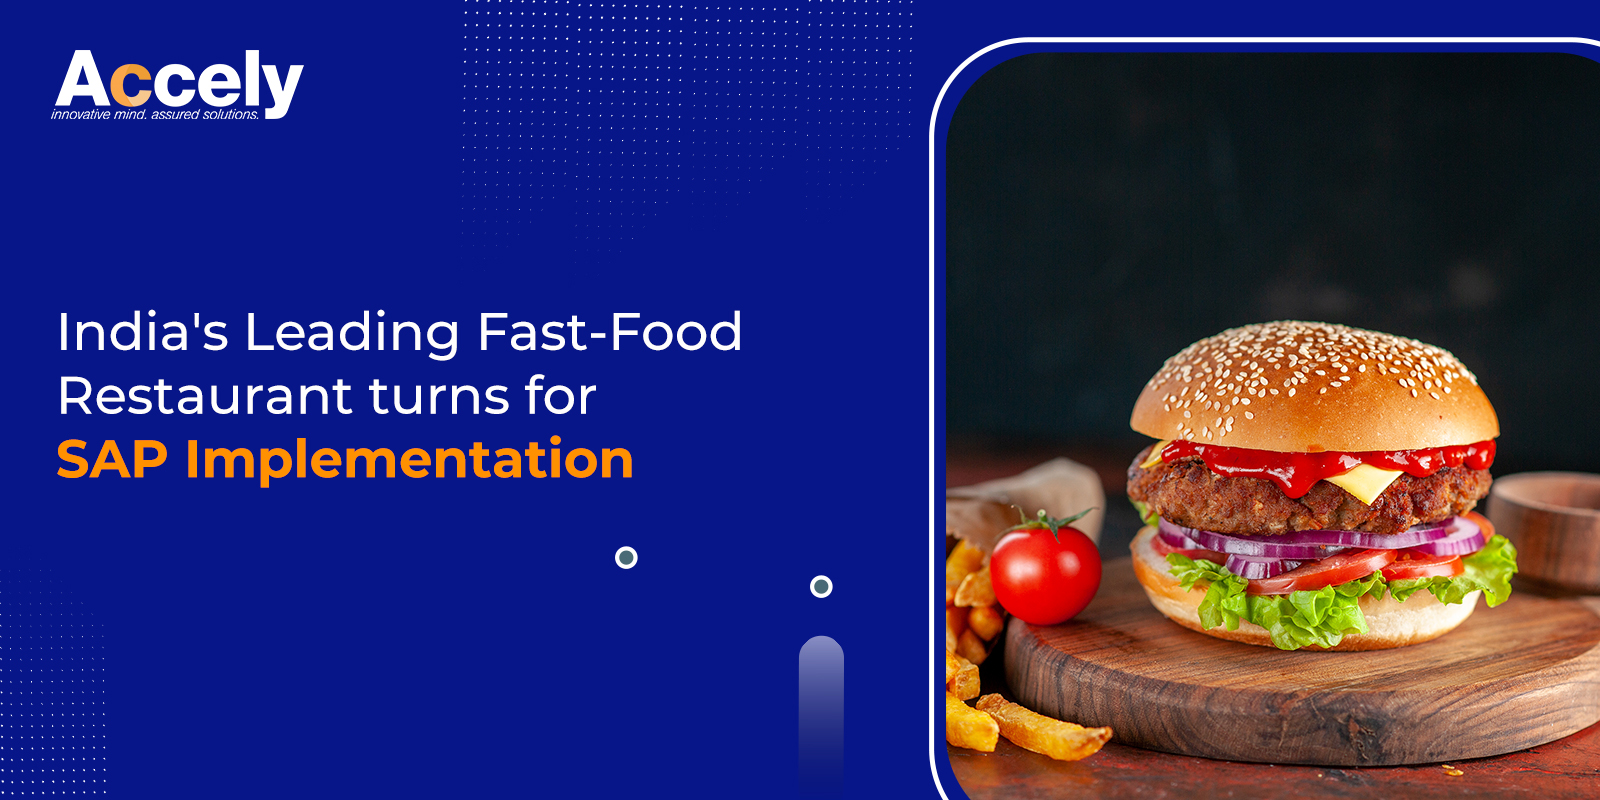 India's Leading Fast-Food Restaurant turns for SAP Implementation